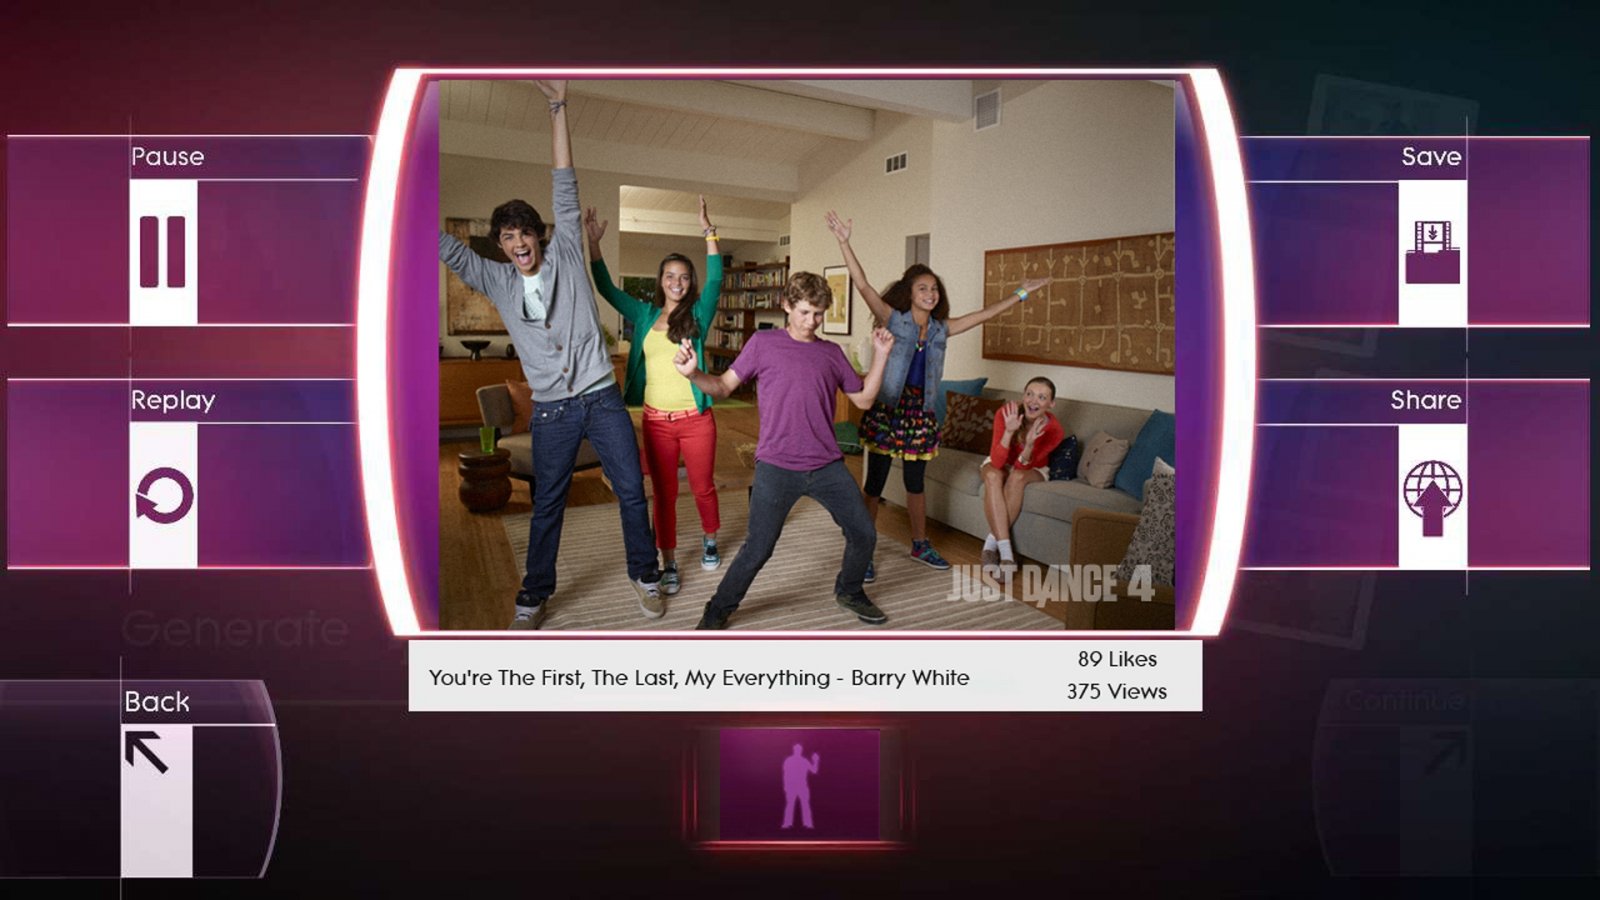 Is it just a game. Симулятор танцев. Ubisoft just Dance (2012). Just Dance 4.